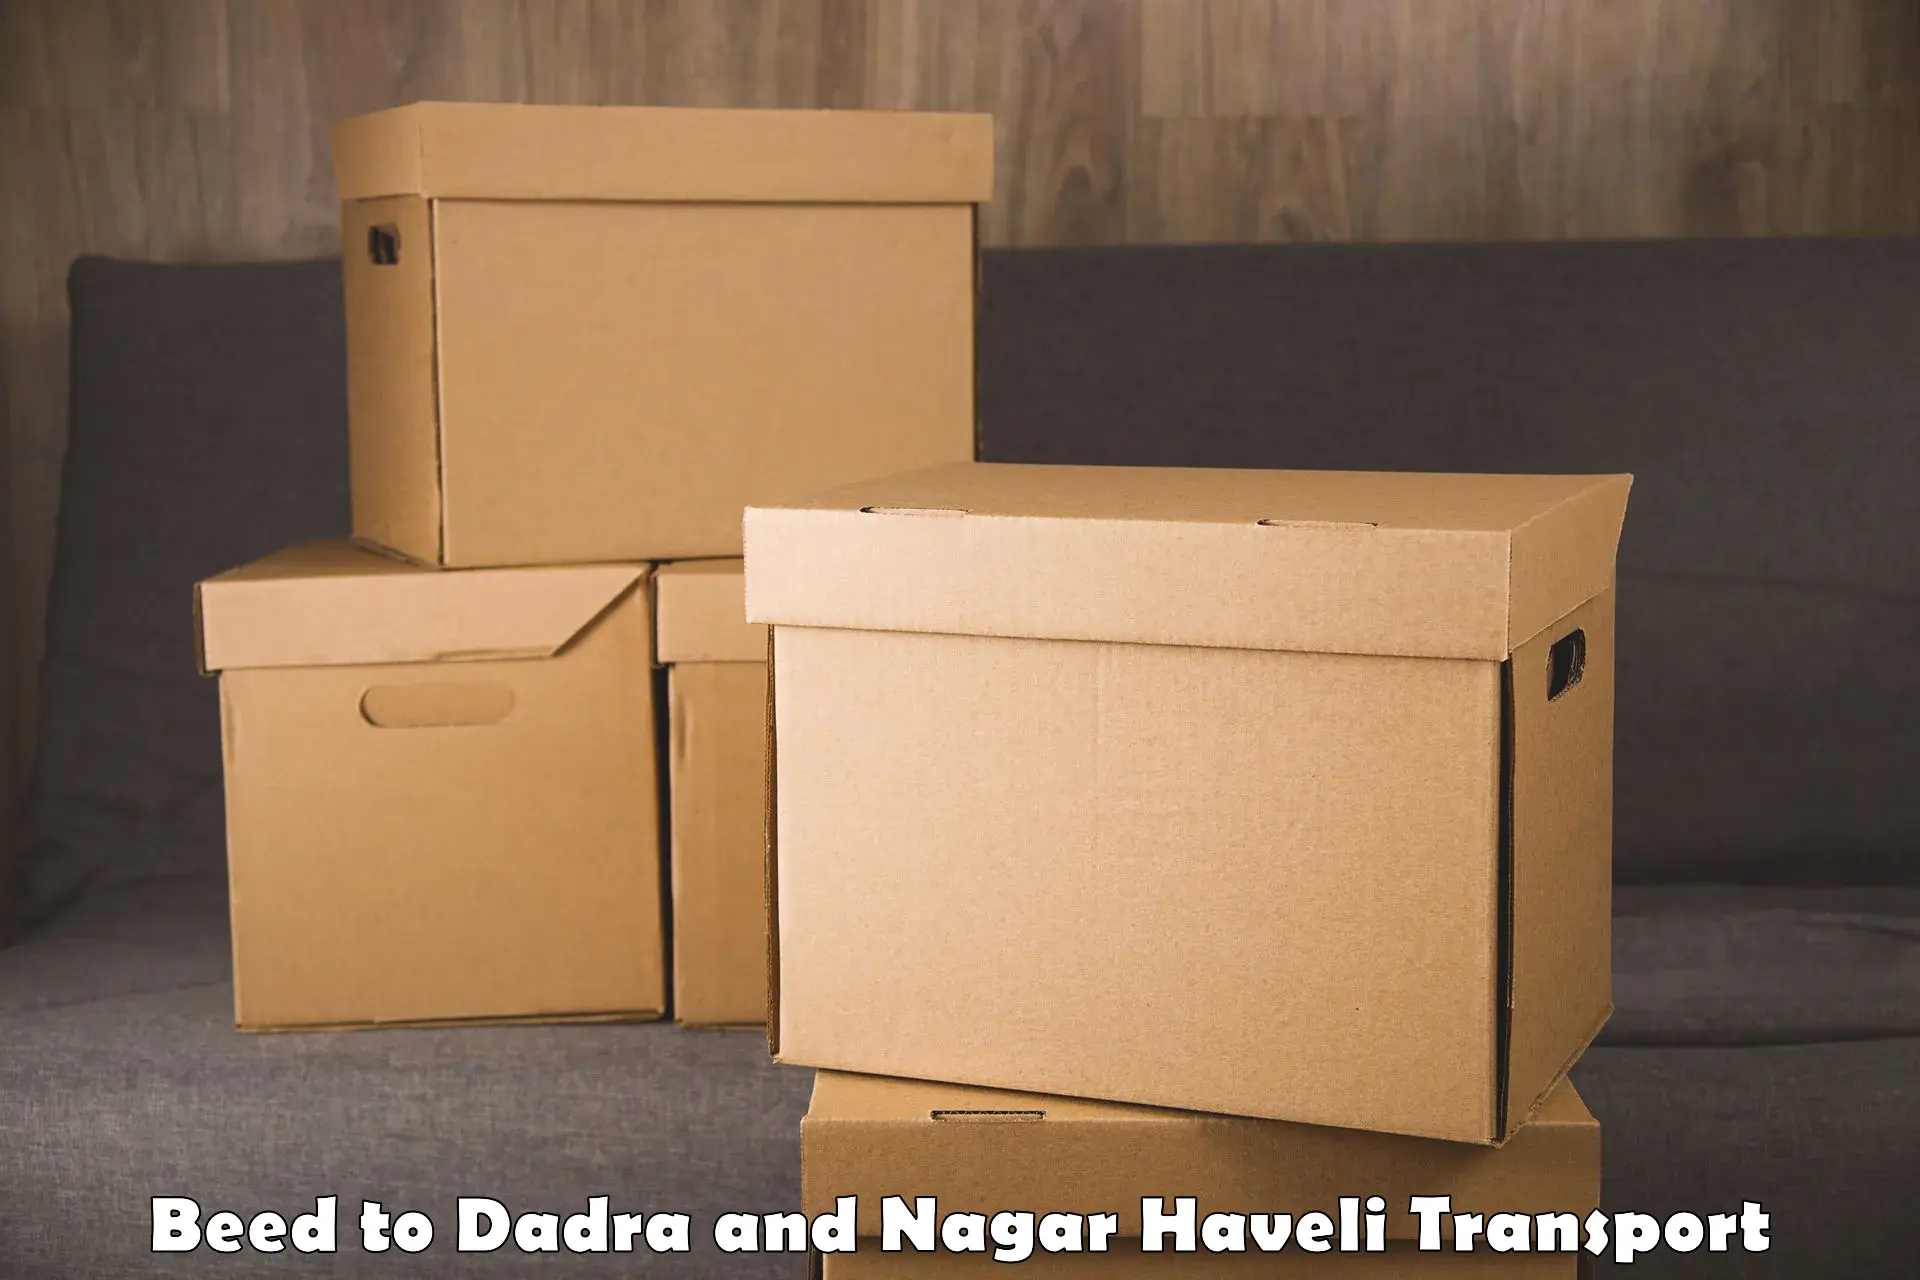 Daily parcel service transport Beed to Dadra and Nagar Haveli